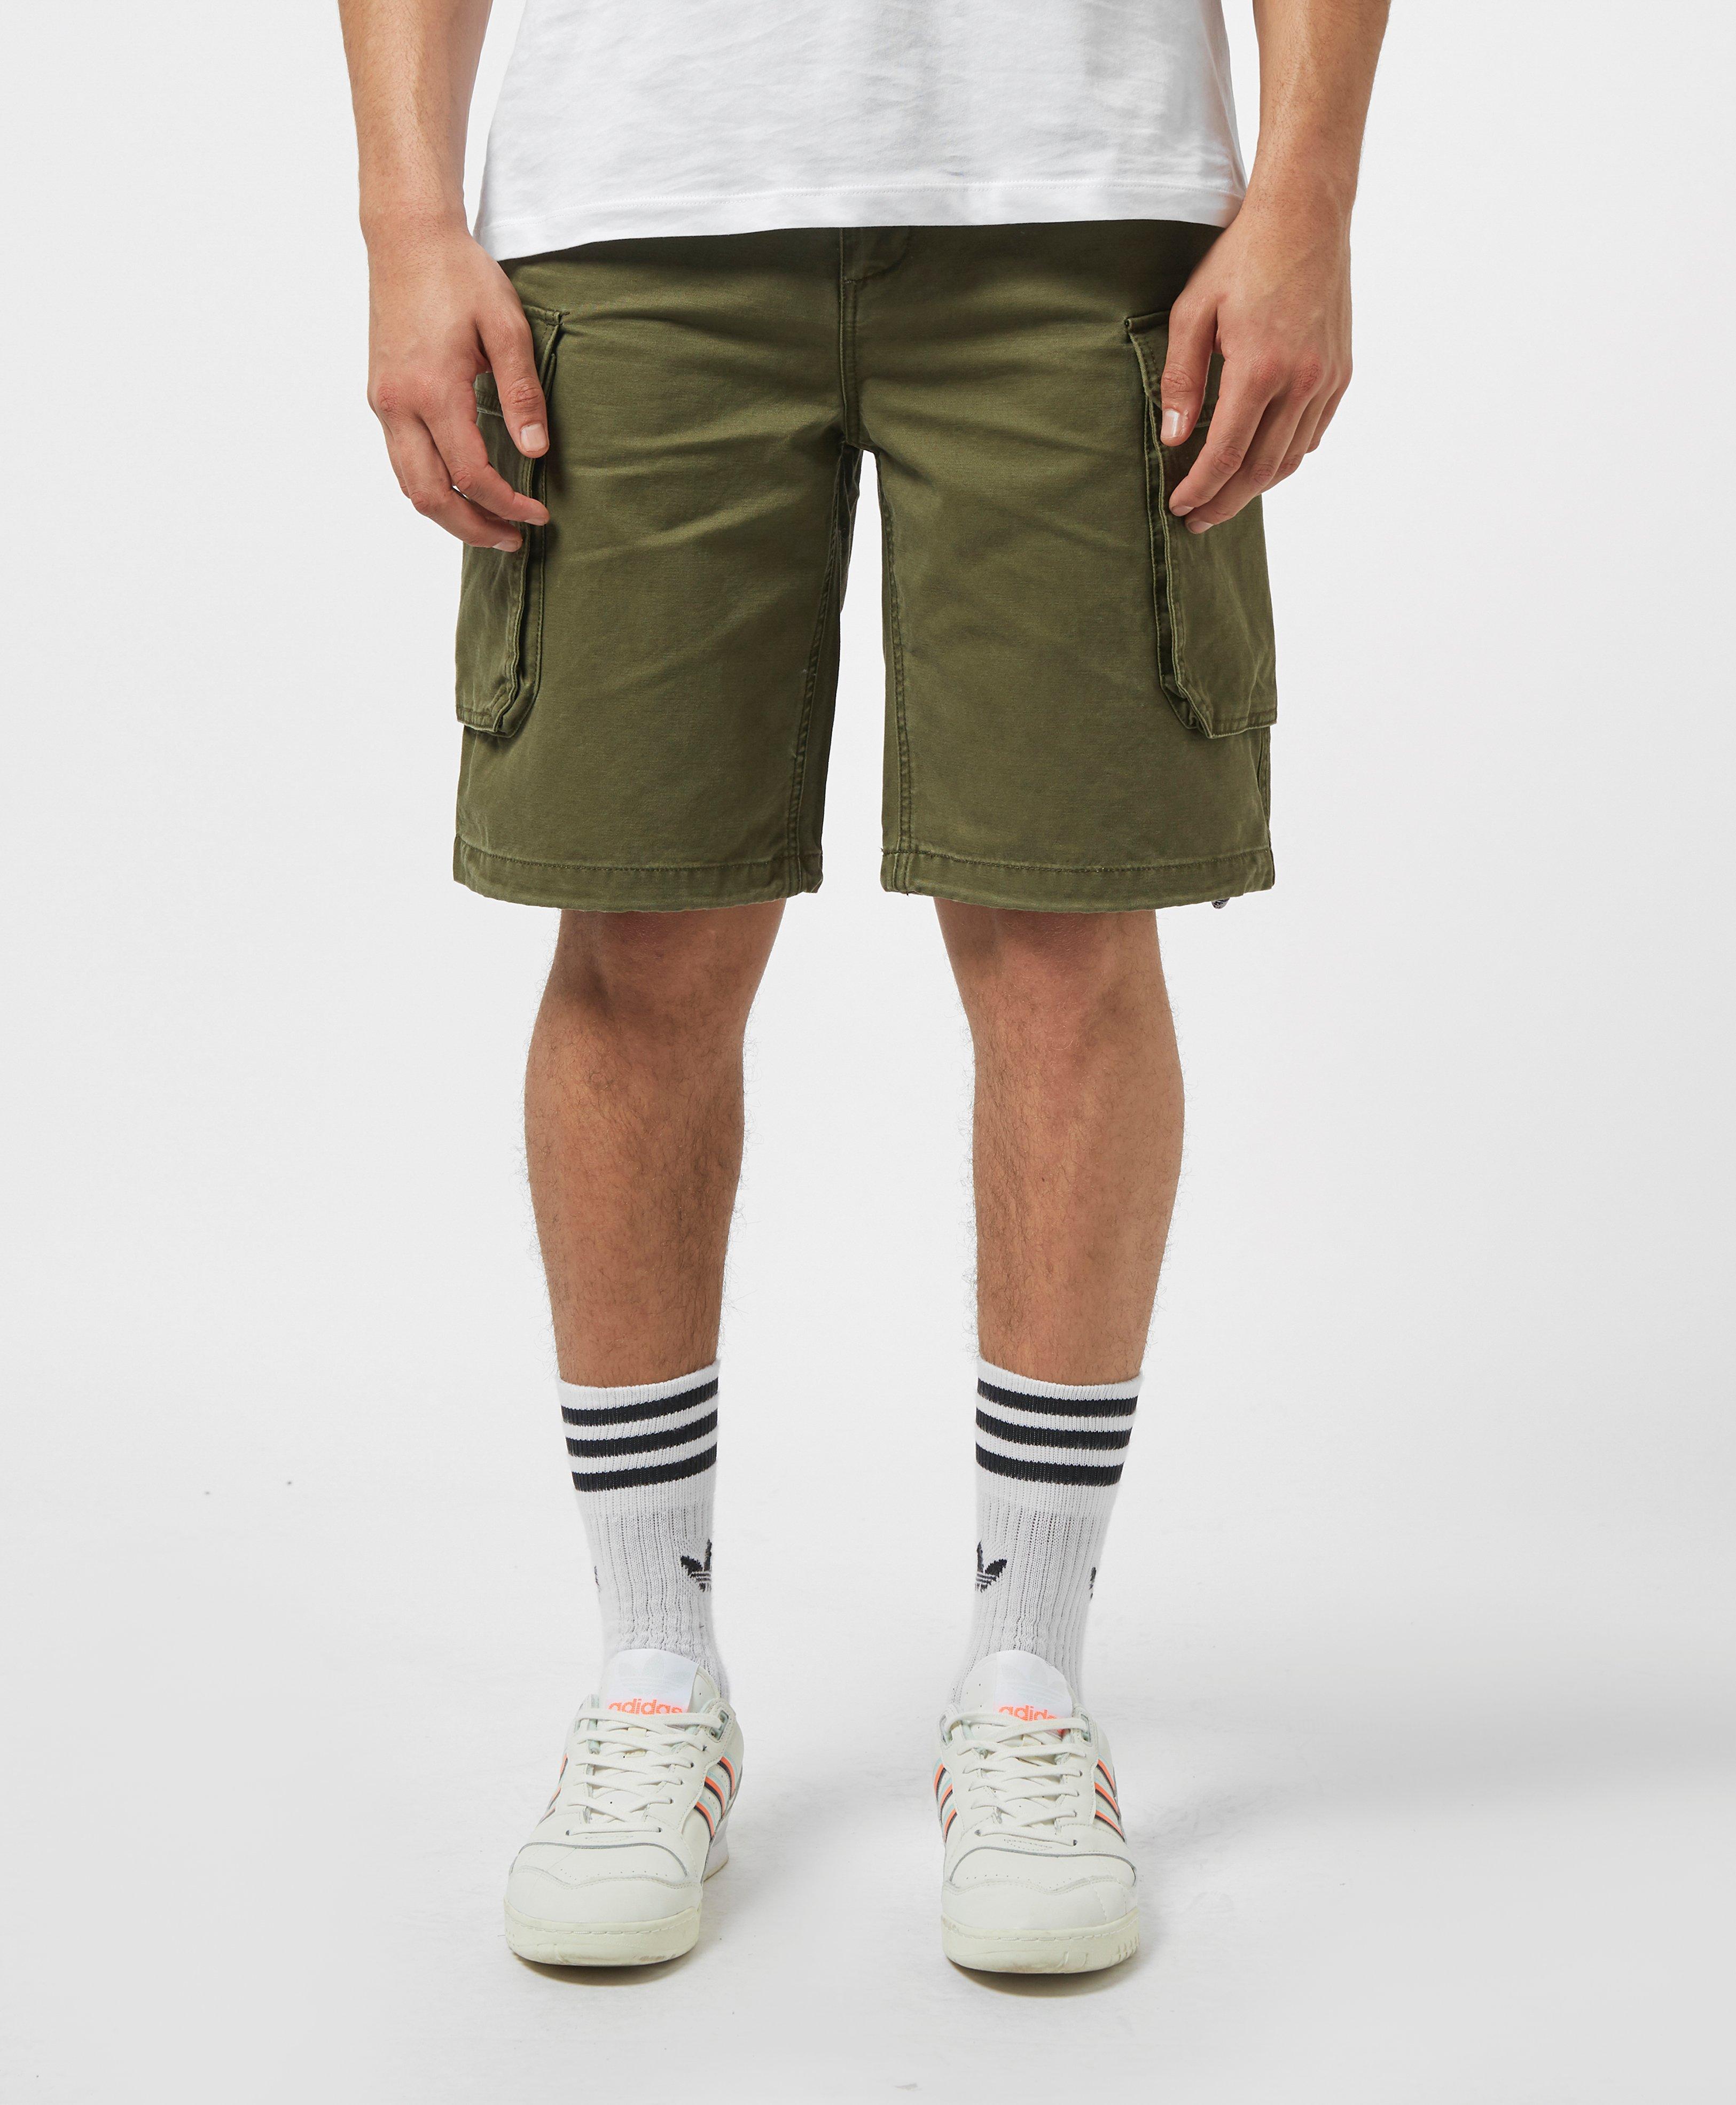 Tommy Hilfiger Cargo Shorts in Green for Men - Lyst